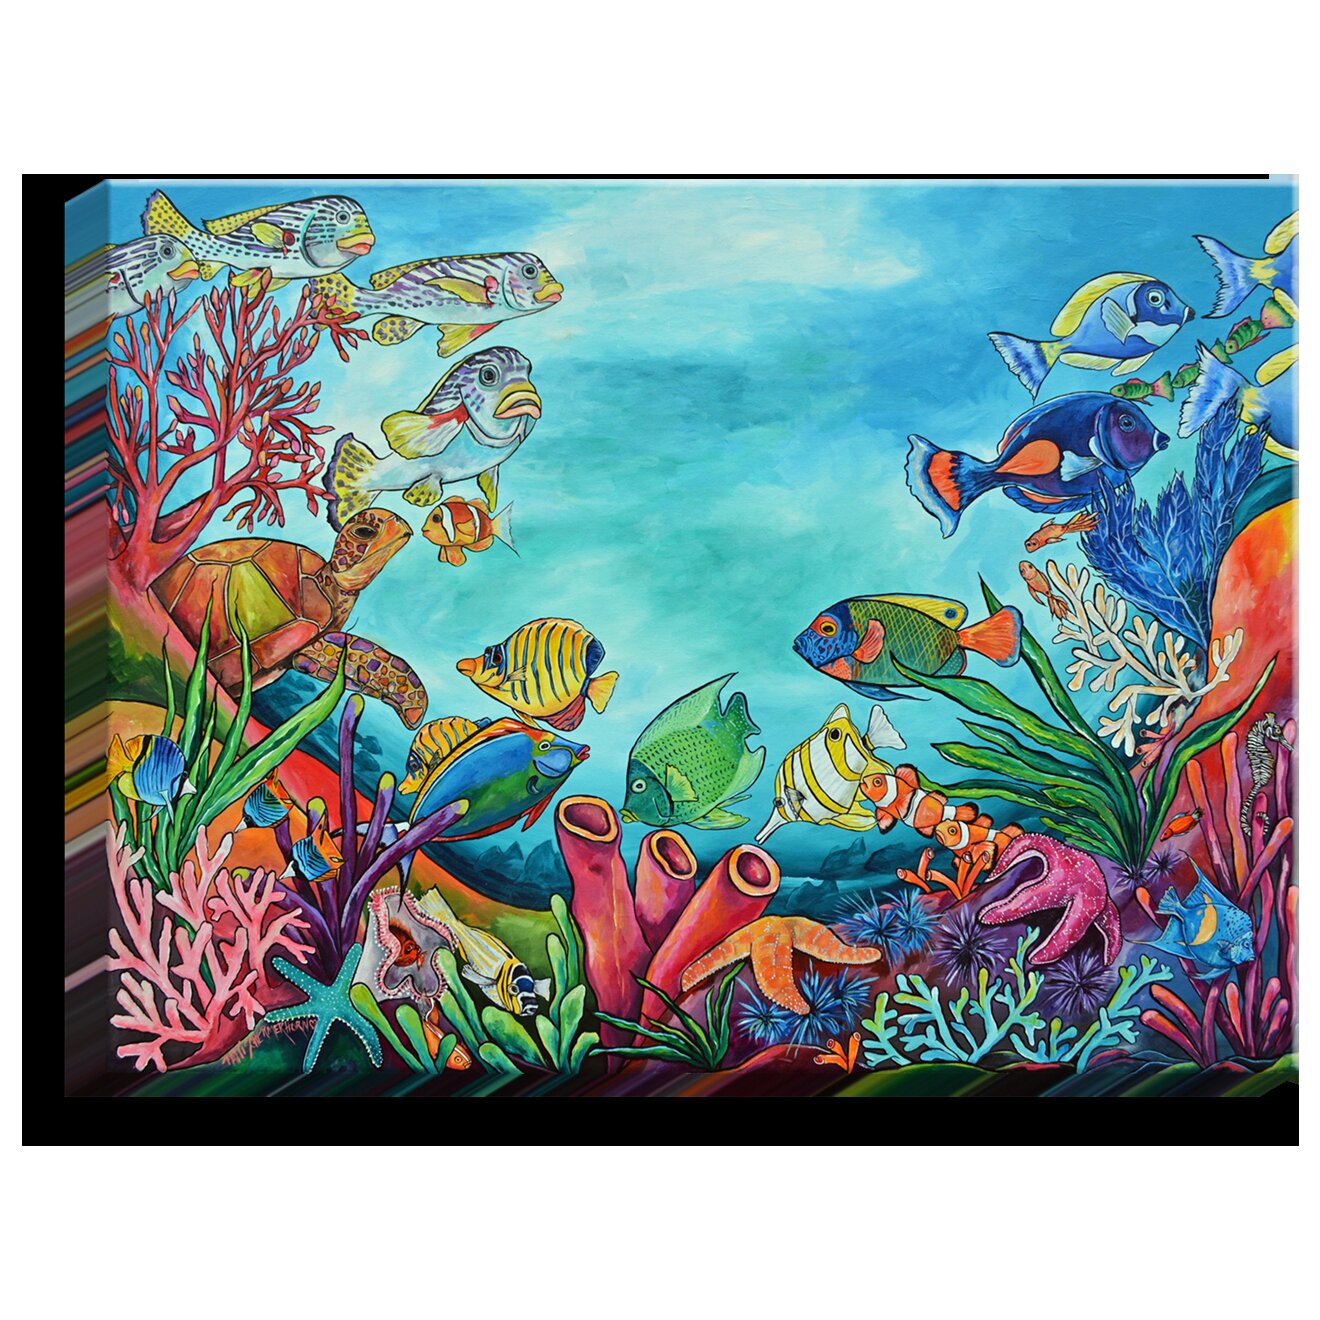 Dianochedesigns Coral Reef By Patti Schermerhorn Wrapped Canvas Print Wayfair